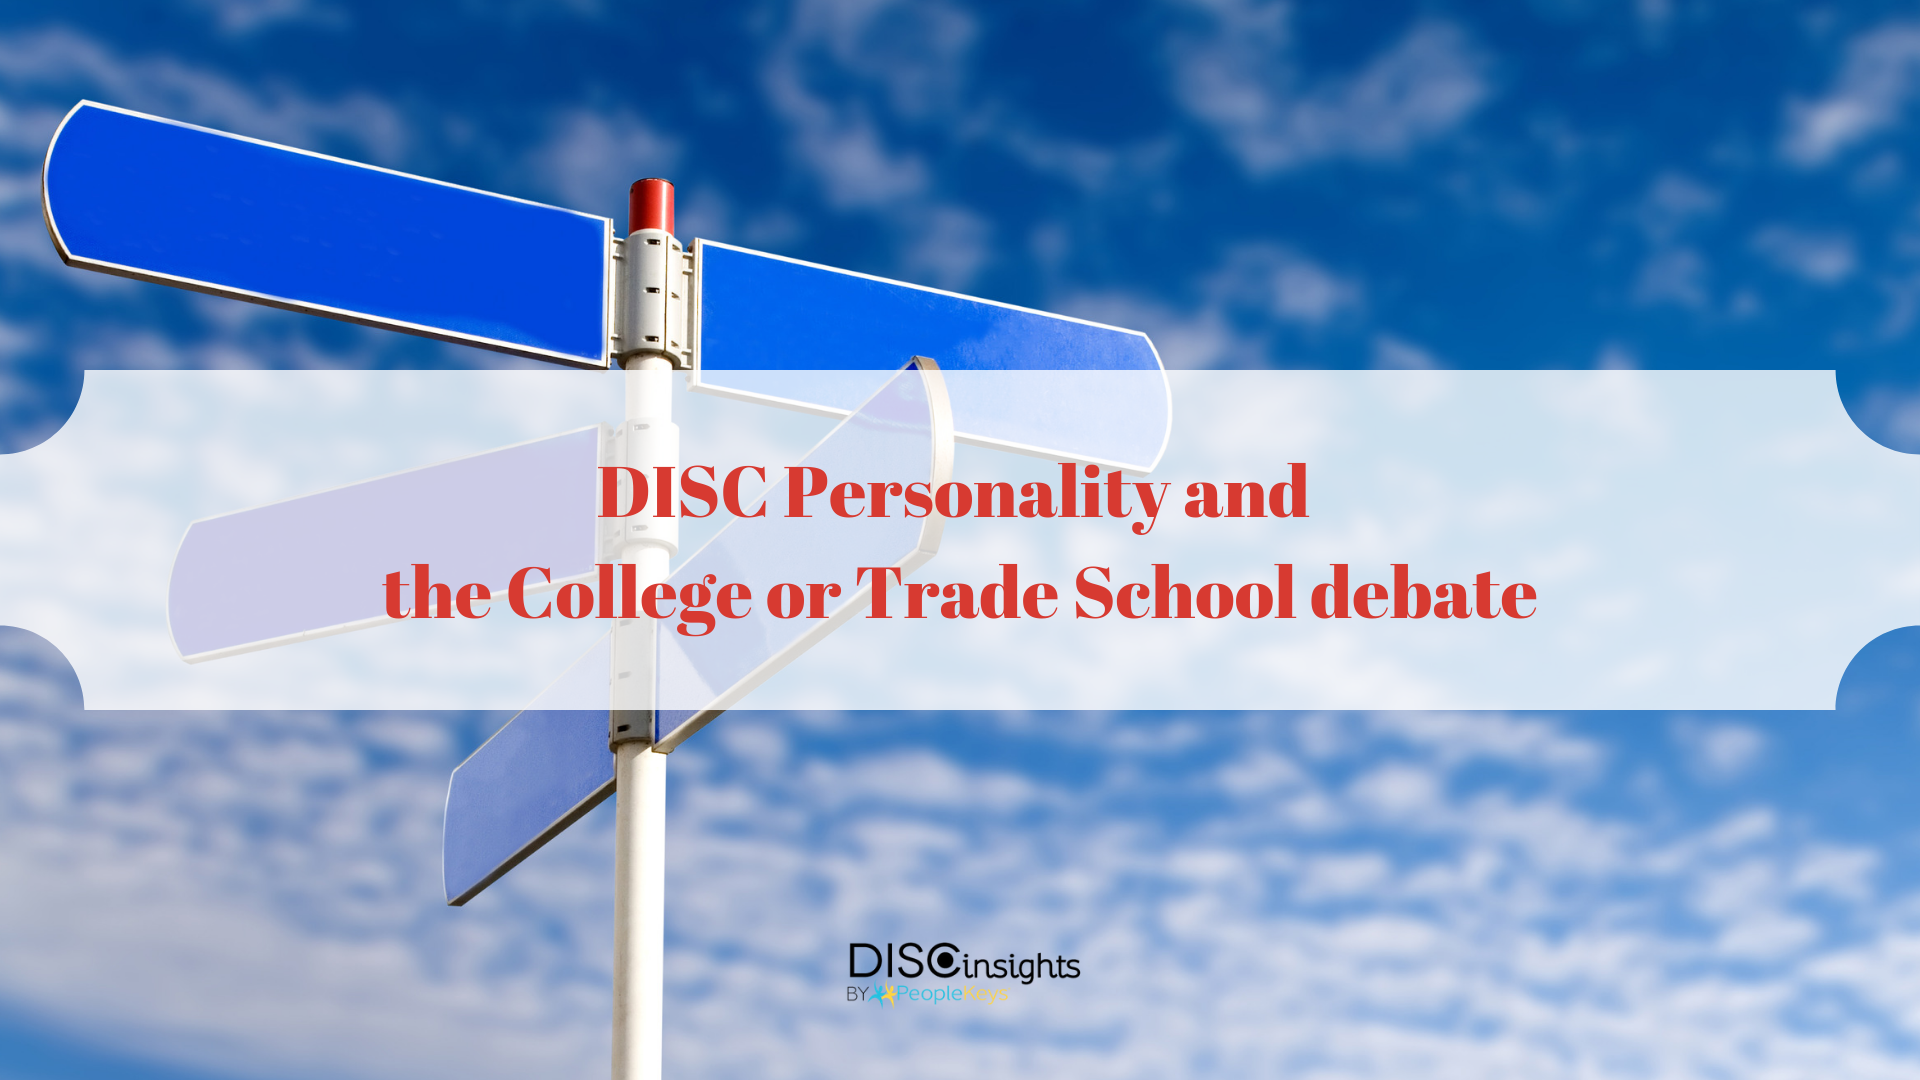 DISC Personality and the College or Trade School debate